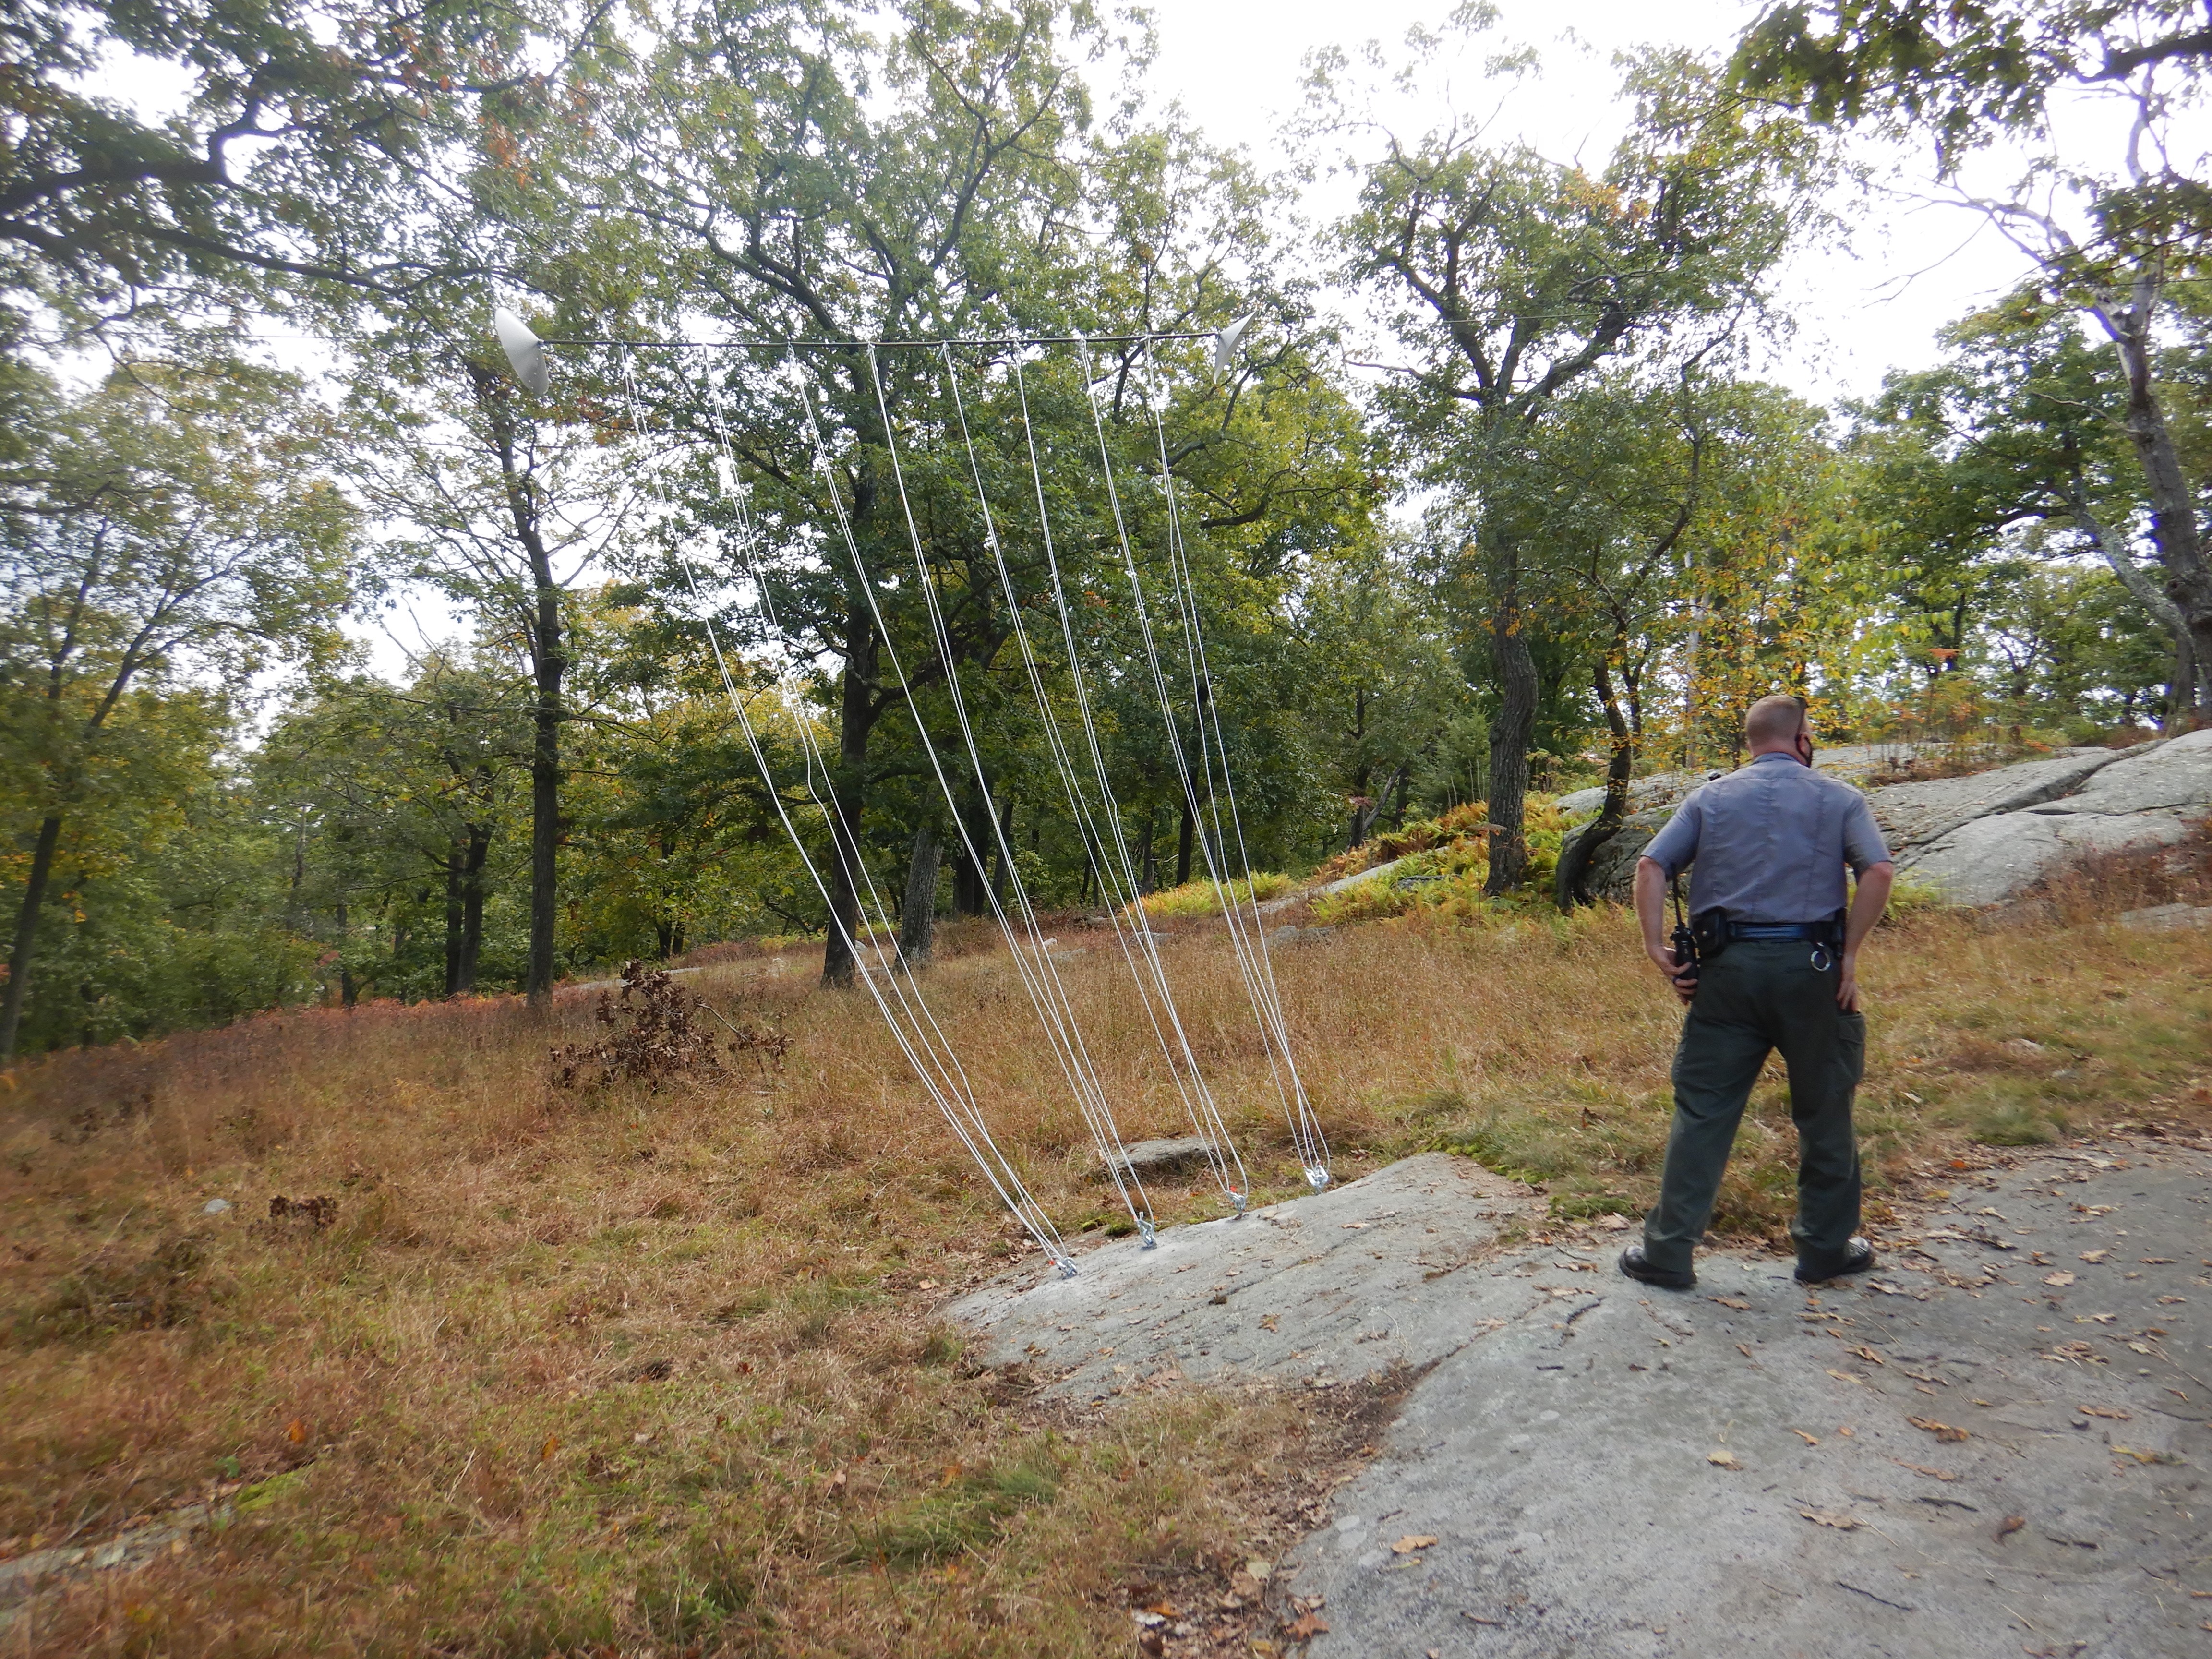 Bear cable installed by the Long Distance Trails Crew at Bare Rocks Shelter in Harriman State Park. Photo by Marty Costello.